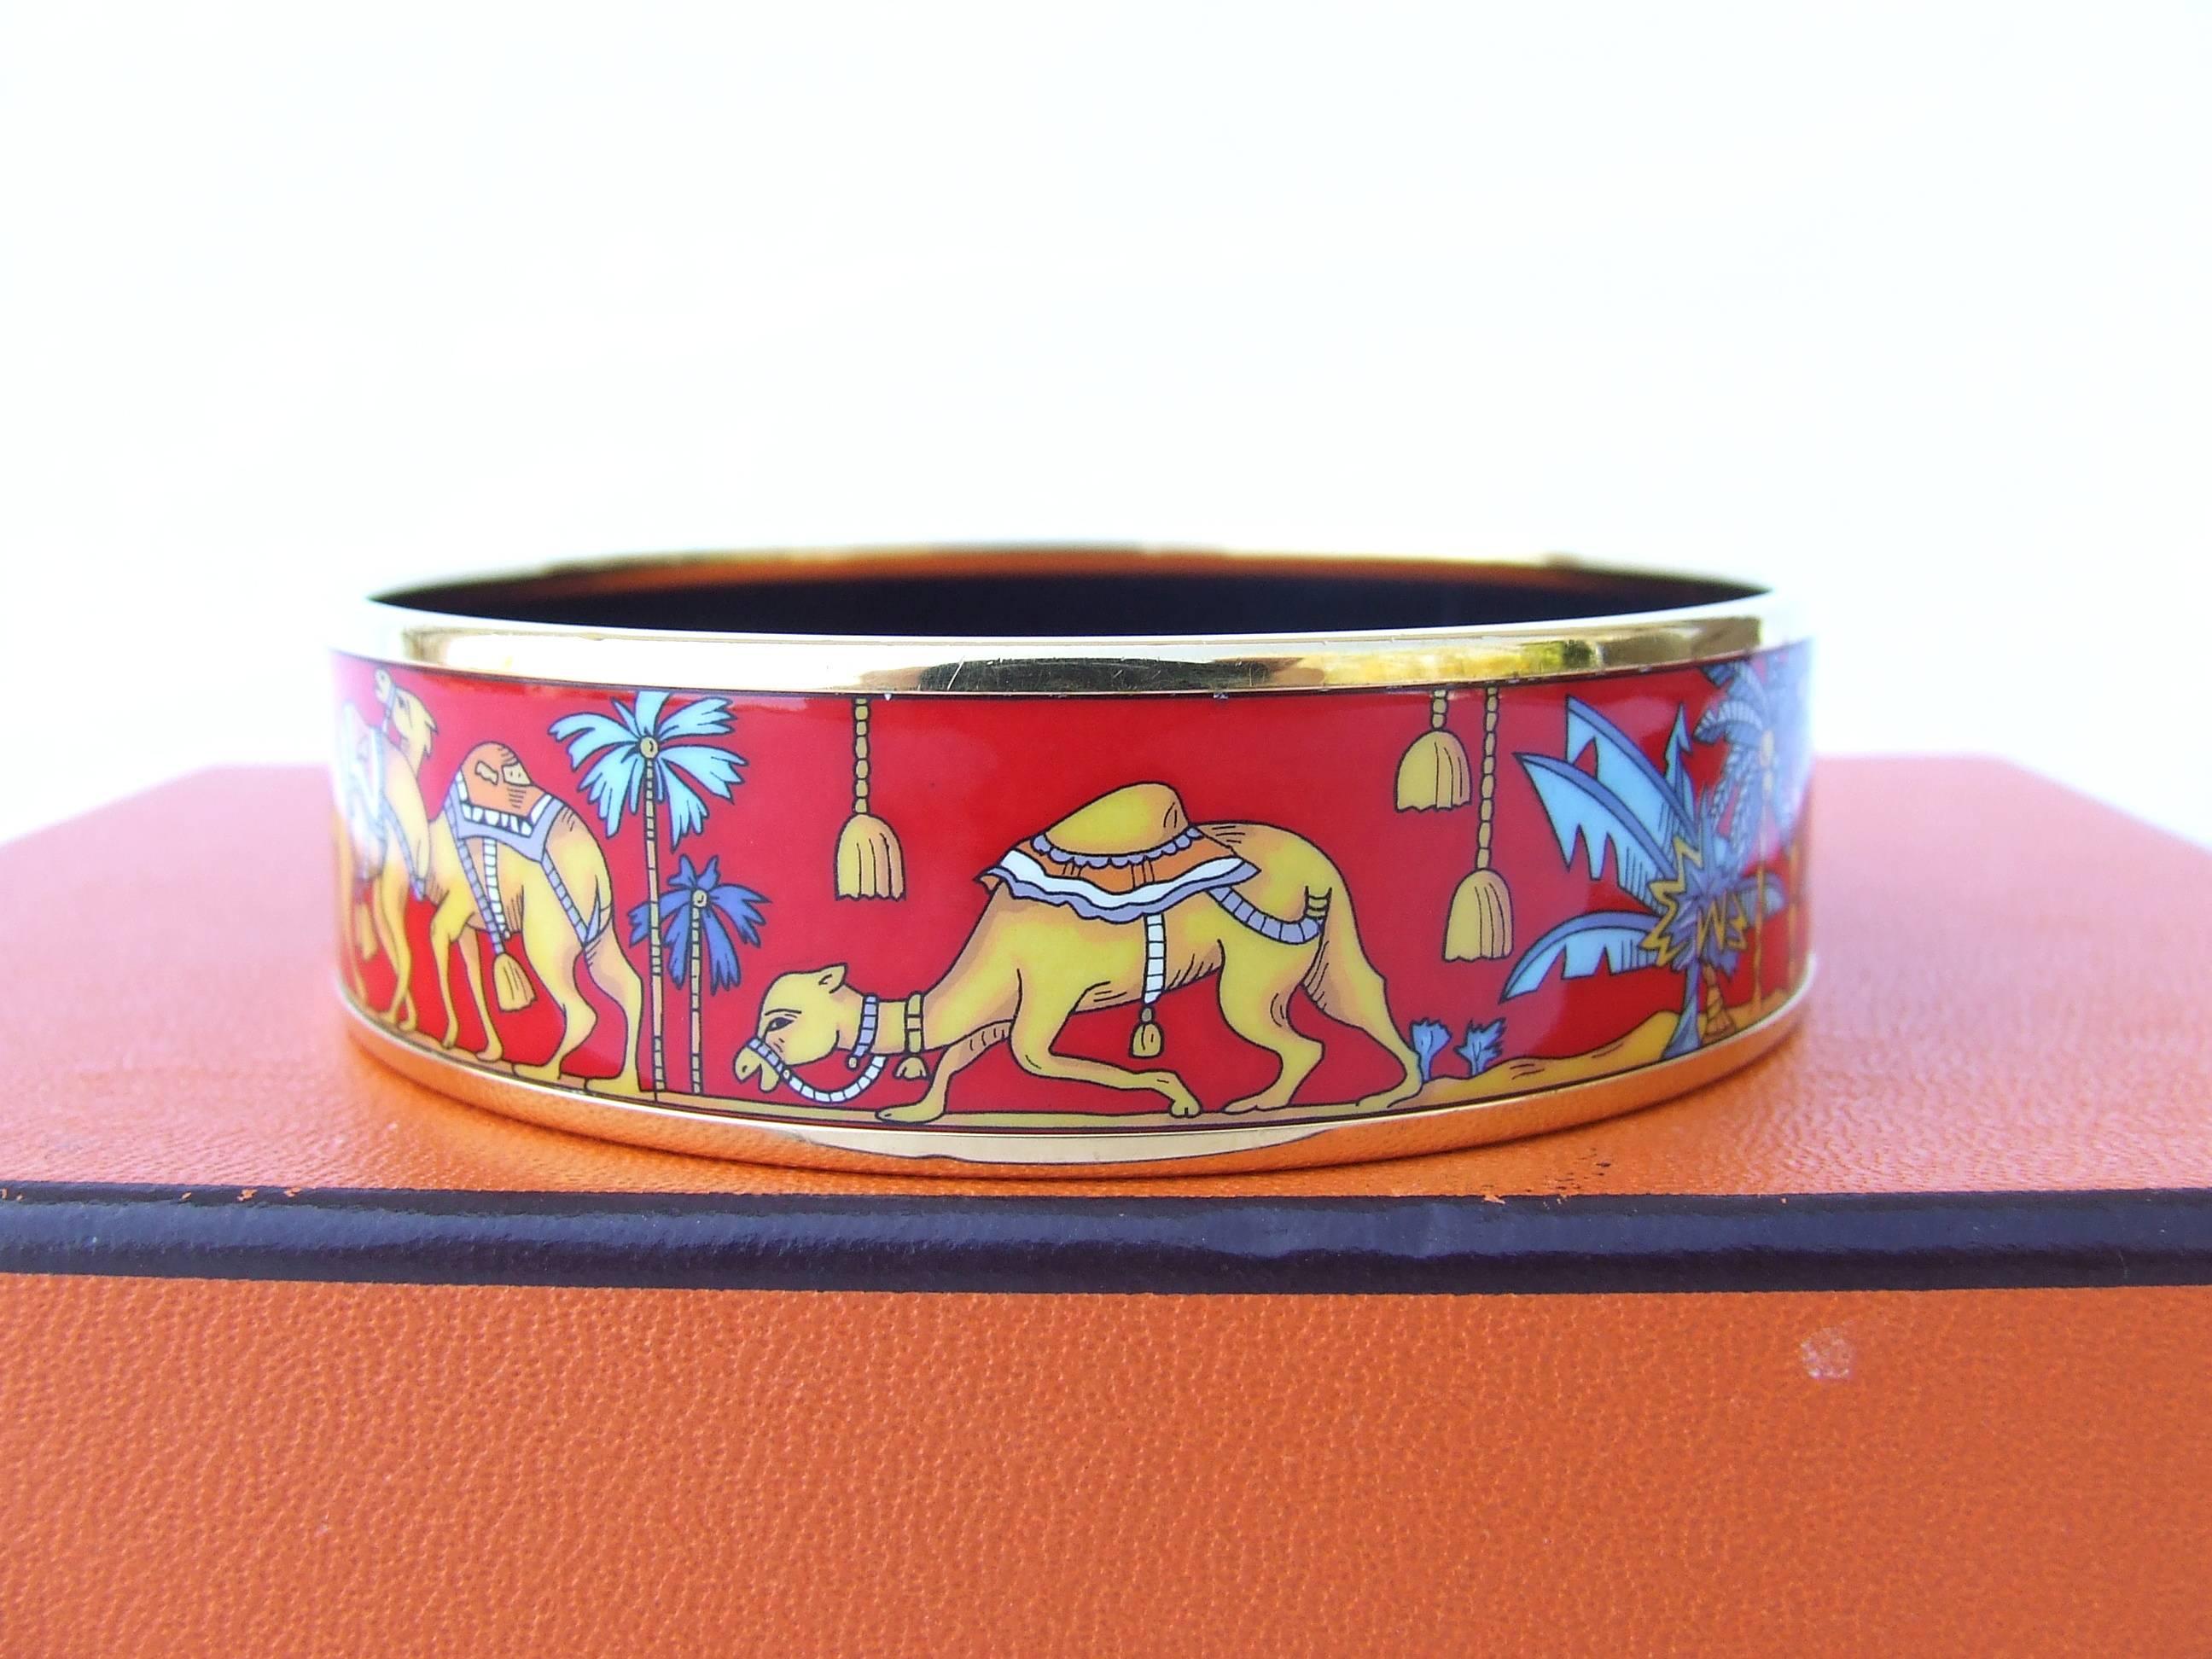 Beautiful and RARE Authentic Hermès Bracelet

Pattern: Camels in Desert (Camels and Palm Trees)

Hard to find !

Made in Austria + F 

Made of printed Enamel and Golden Plated Hardware

Colorways: Red Background, Orange Camels, Blue Palm Trees,